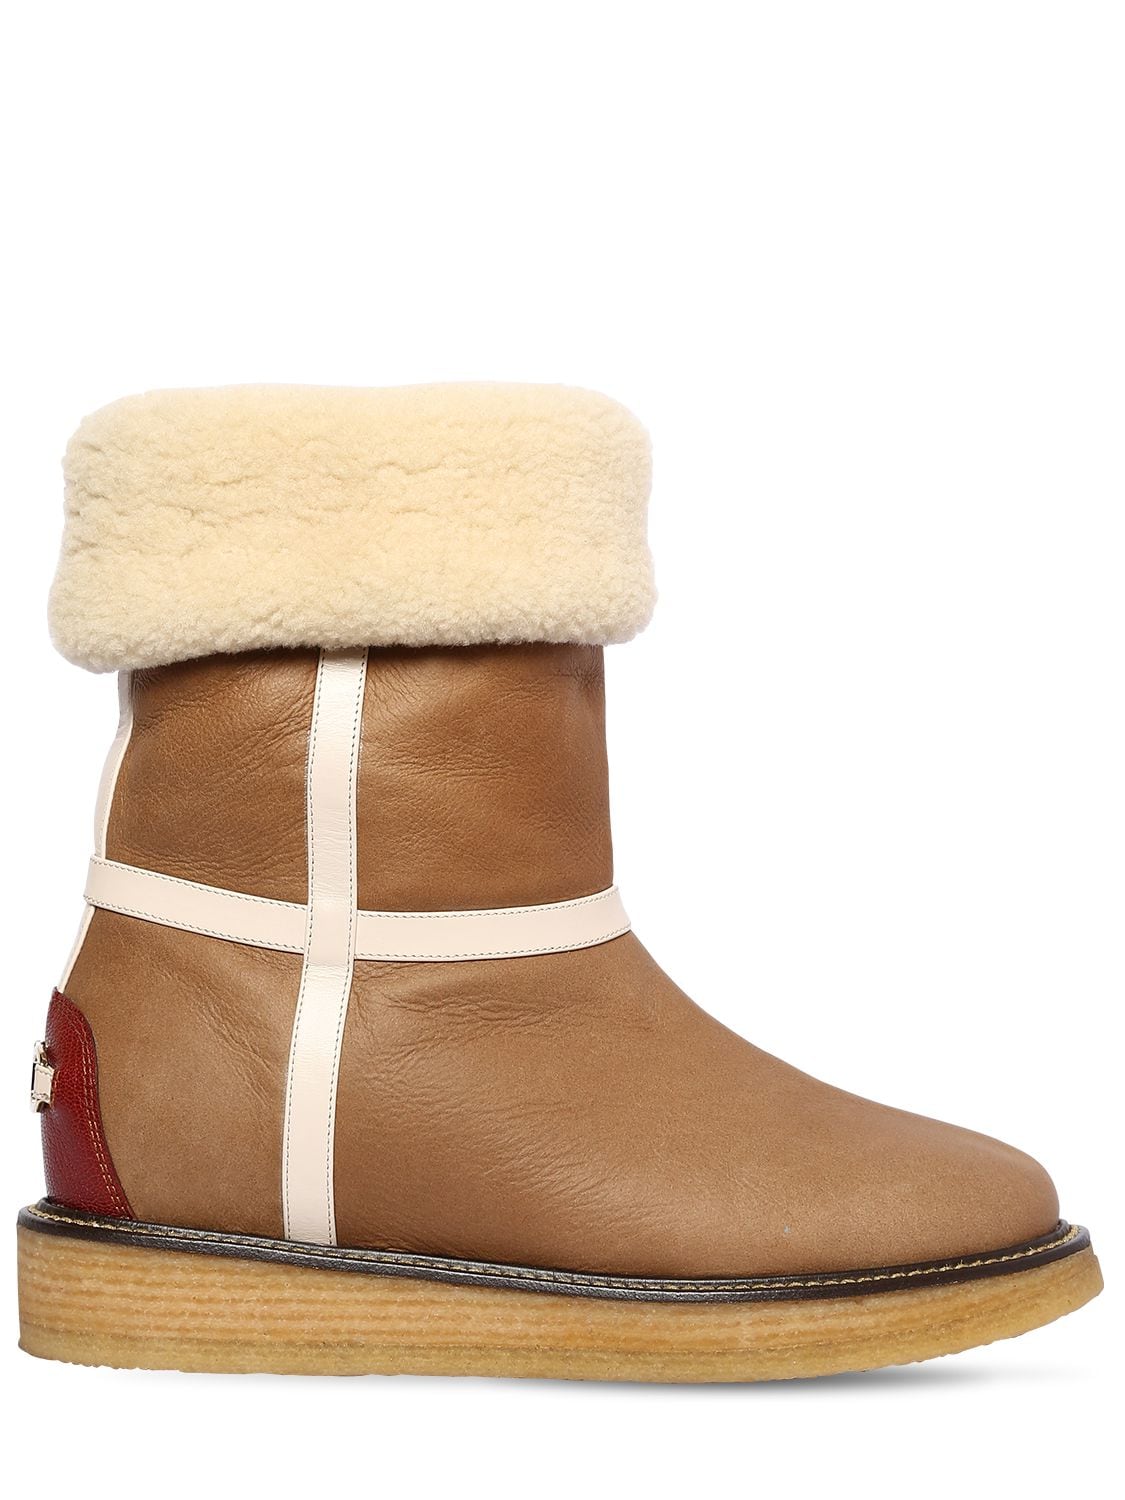 Ferragamo 30mm Cinisi Leather Snow Boots In Tan